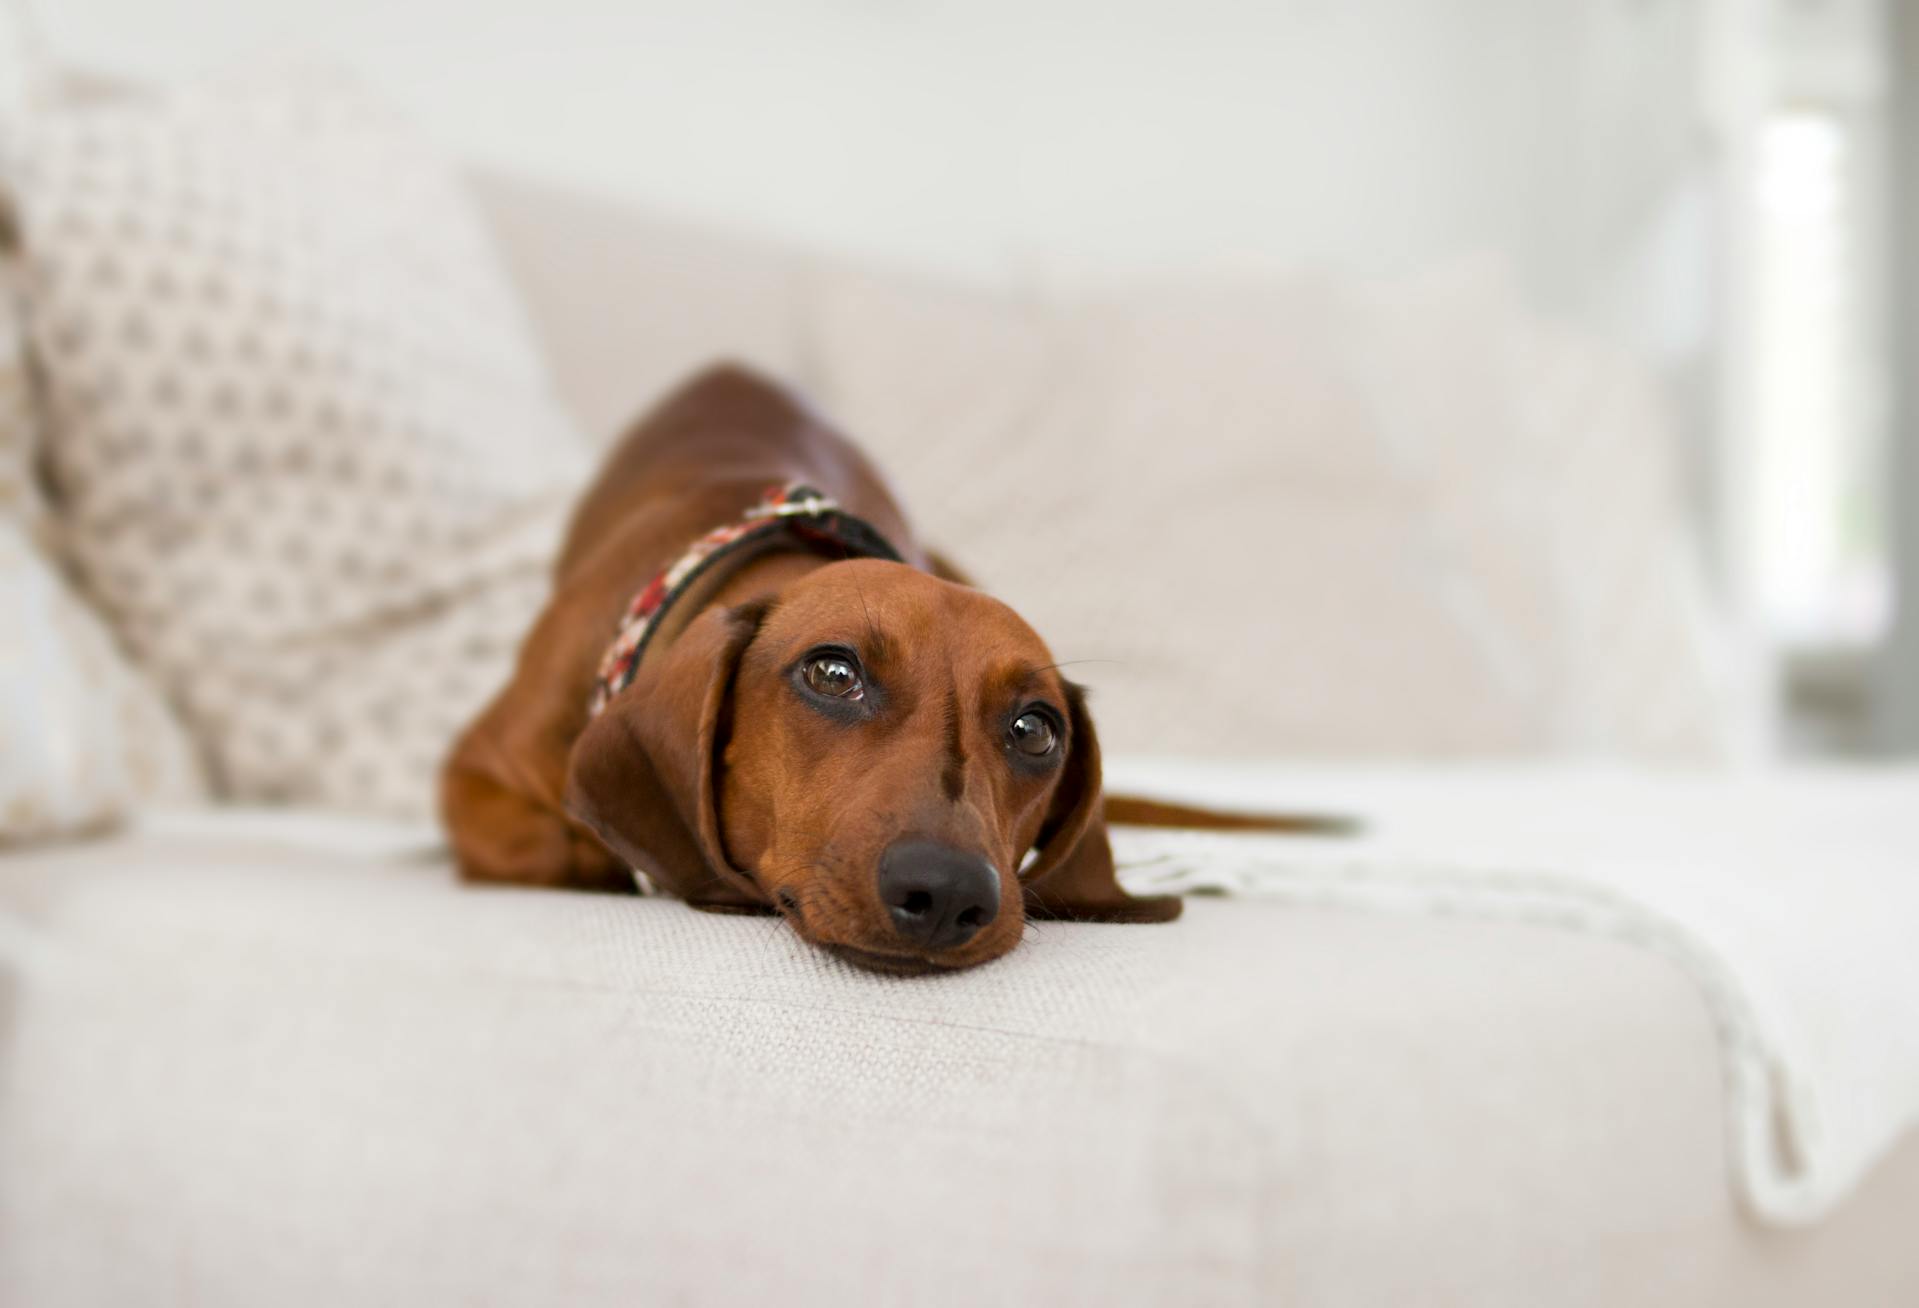 Known for their distinctive elongated bodies and playful personalities, Dachshunds are also celebrated for their relatively long lifespans. However, their unique physique predisposes them to certain health issues, such as intervertebral disc disease. To promote longevity in Dachshunds, it's crucial to monitor their weight, provide appropriate exercise, and avoid activities that strain their backs. :: Pexels